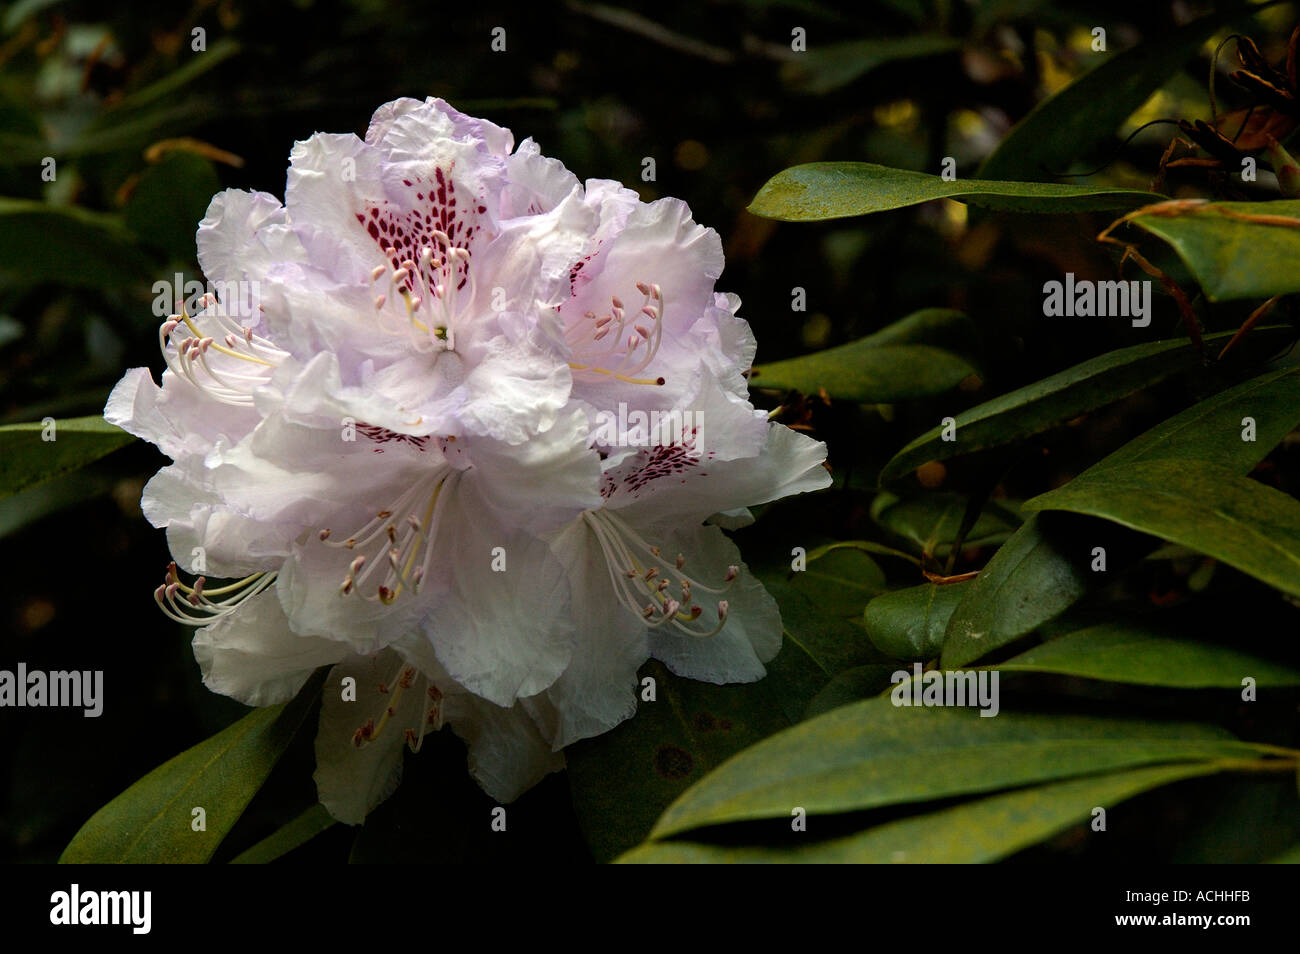 Rhododendron Stock Photo